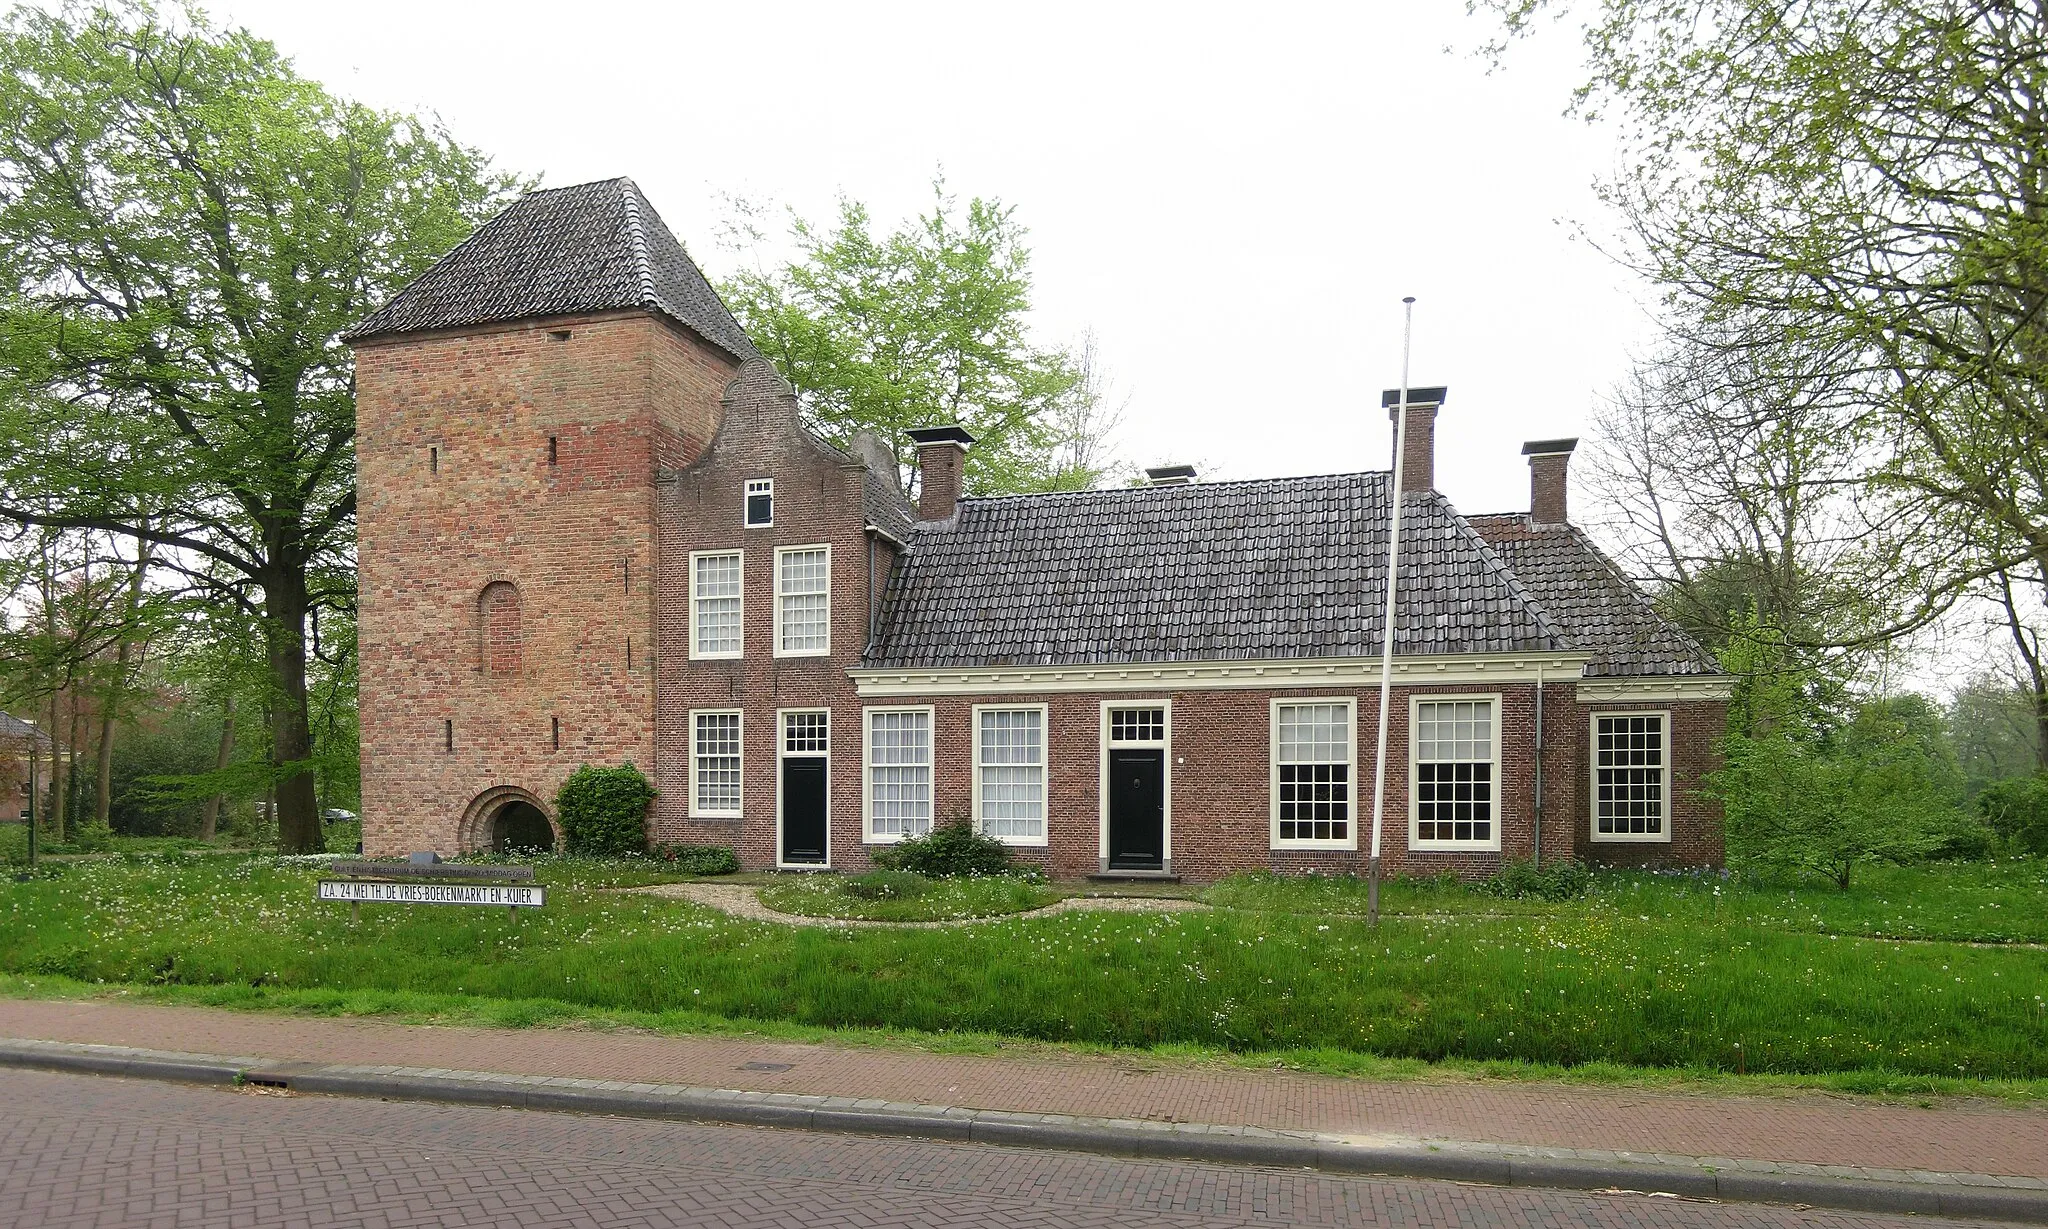 Photo showing: This is an image of rijksmonument number 11700